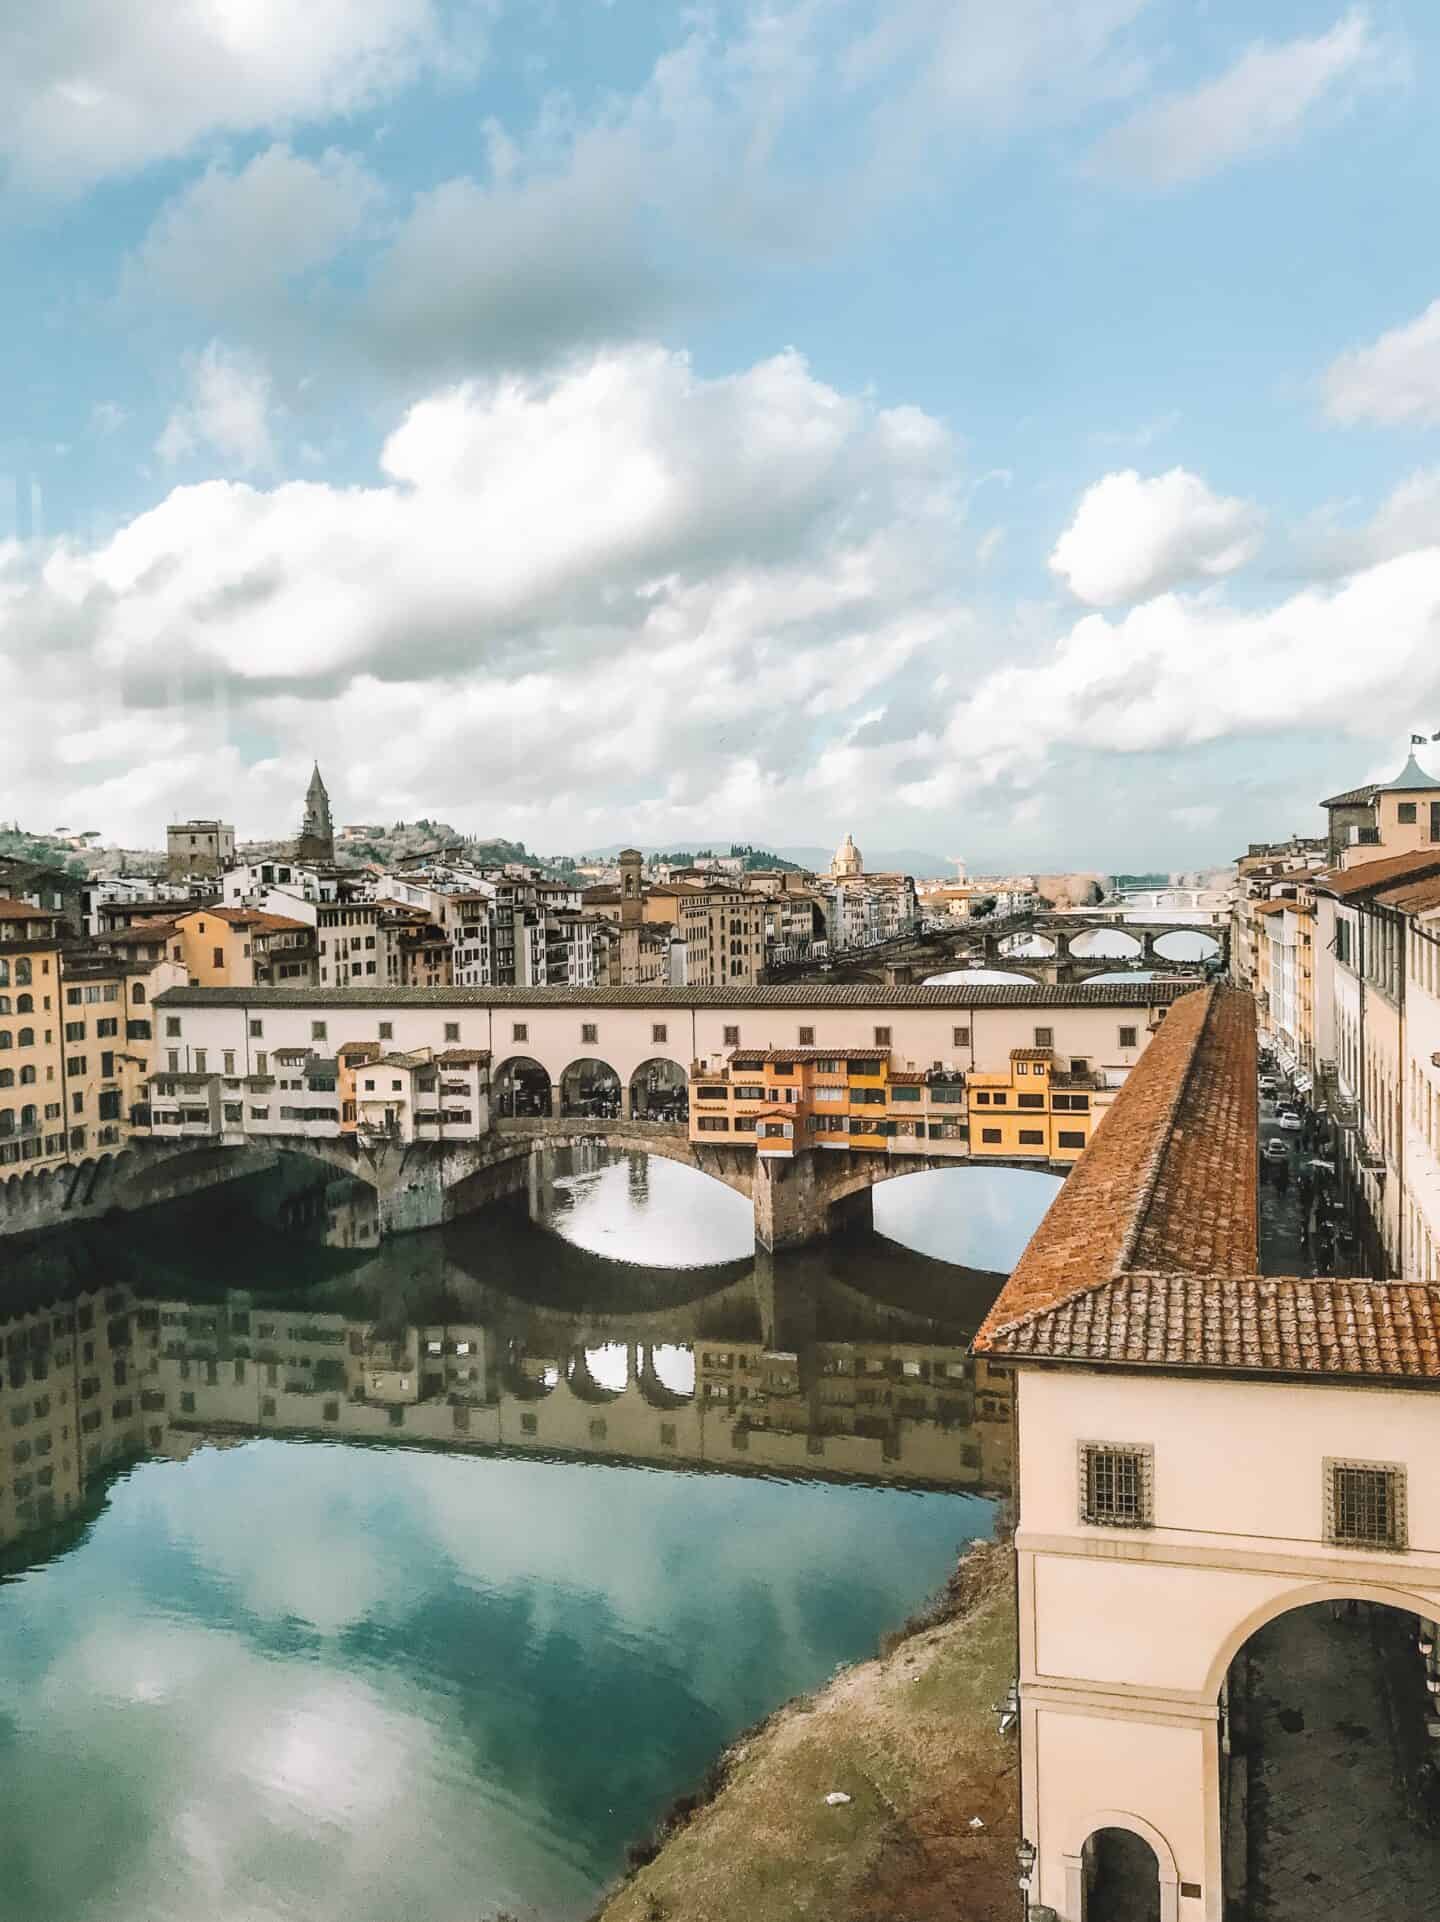 Views of the Ponte Vecchio from the Uffizi Gallery in Florence Italy